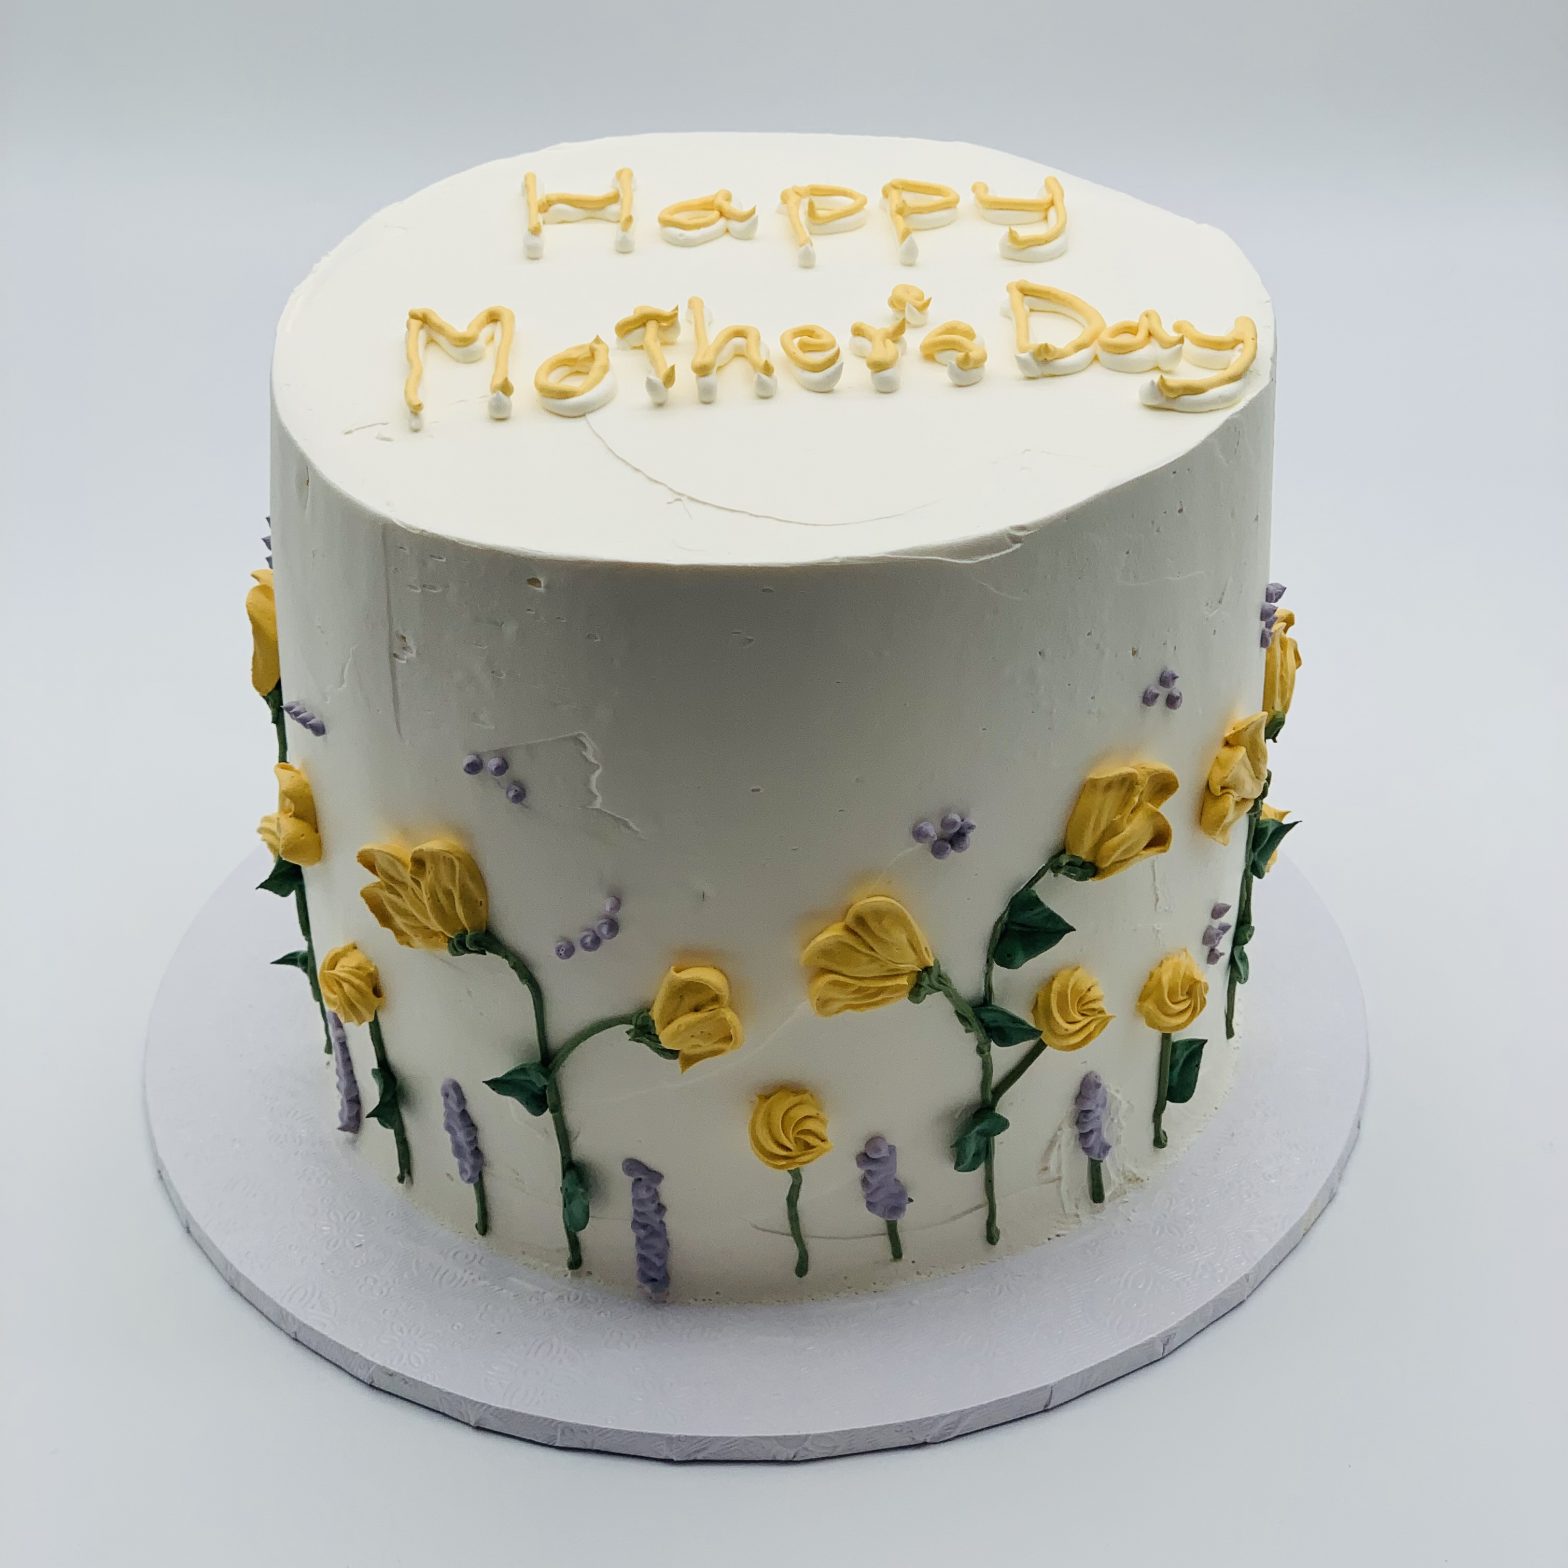 MOTHER’S DAY CAKE 1